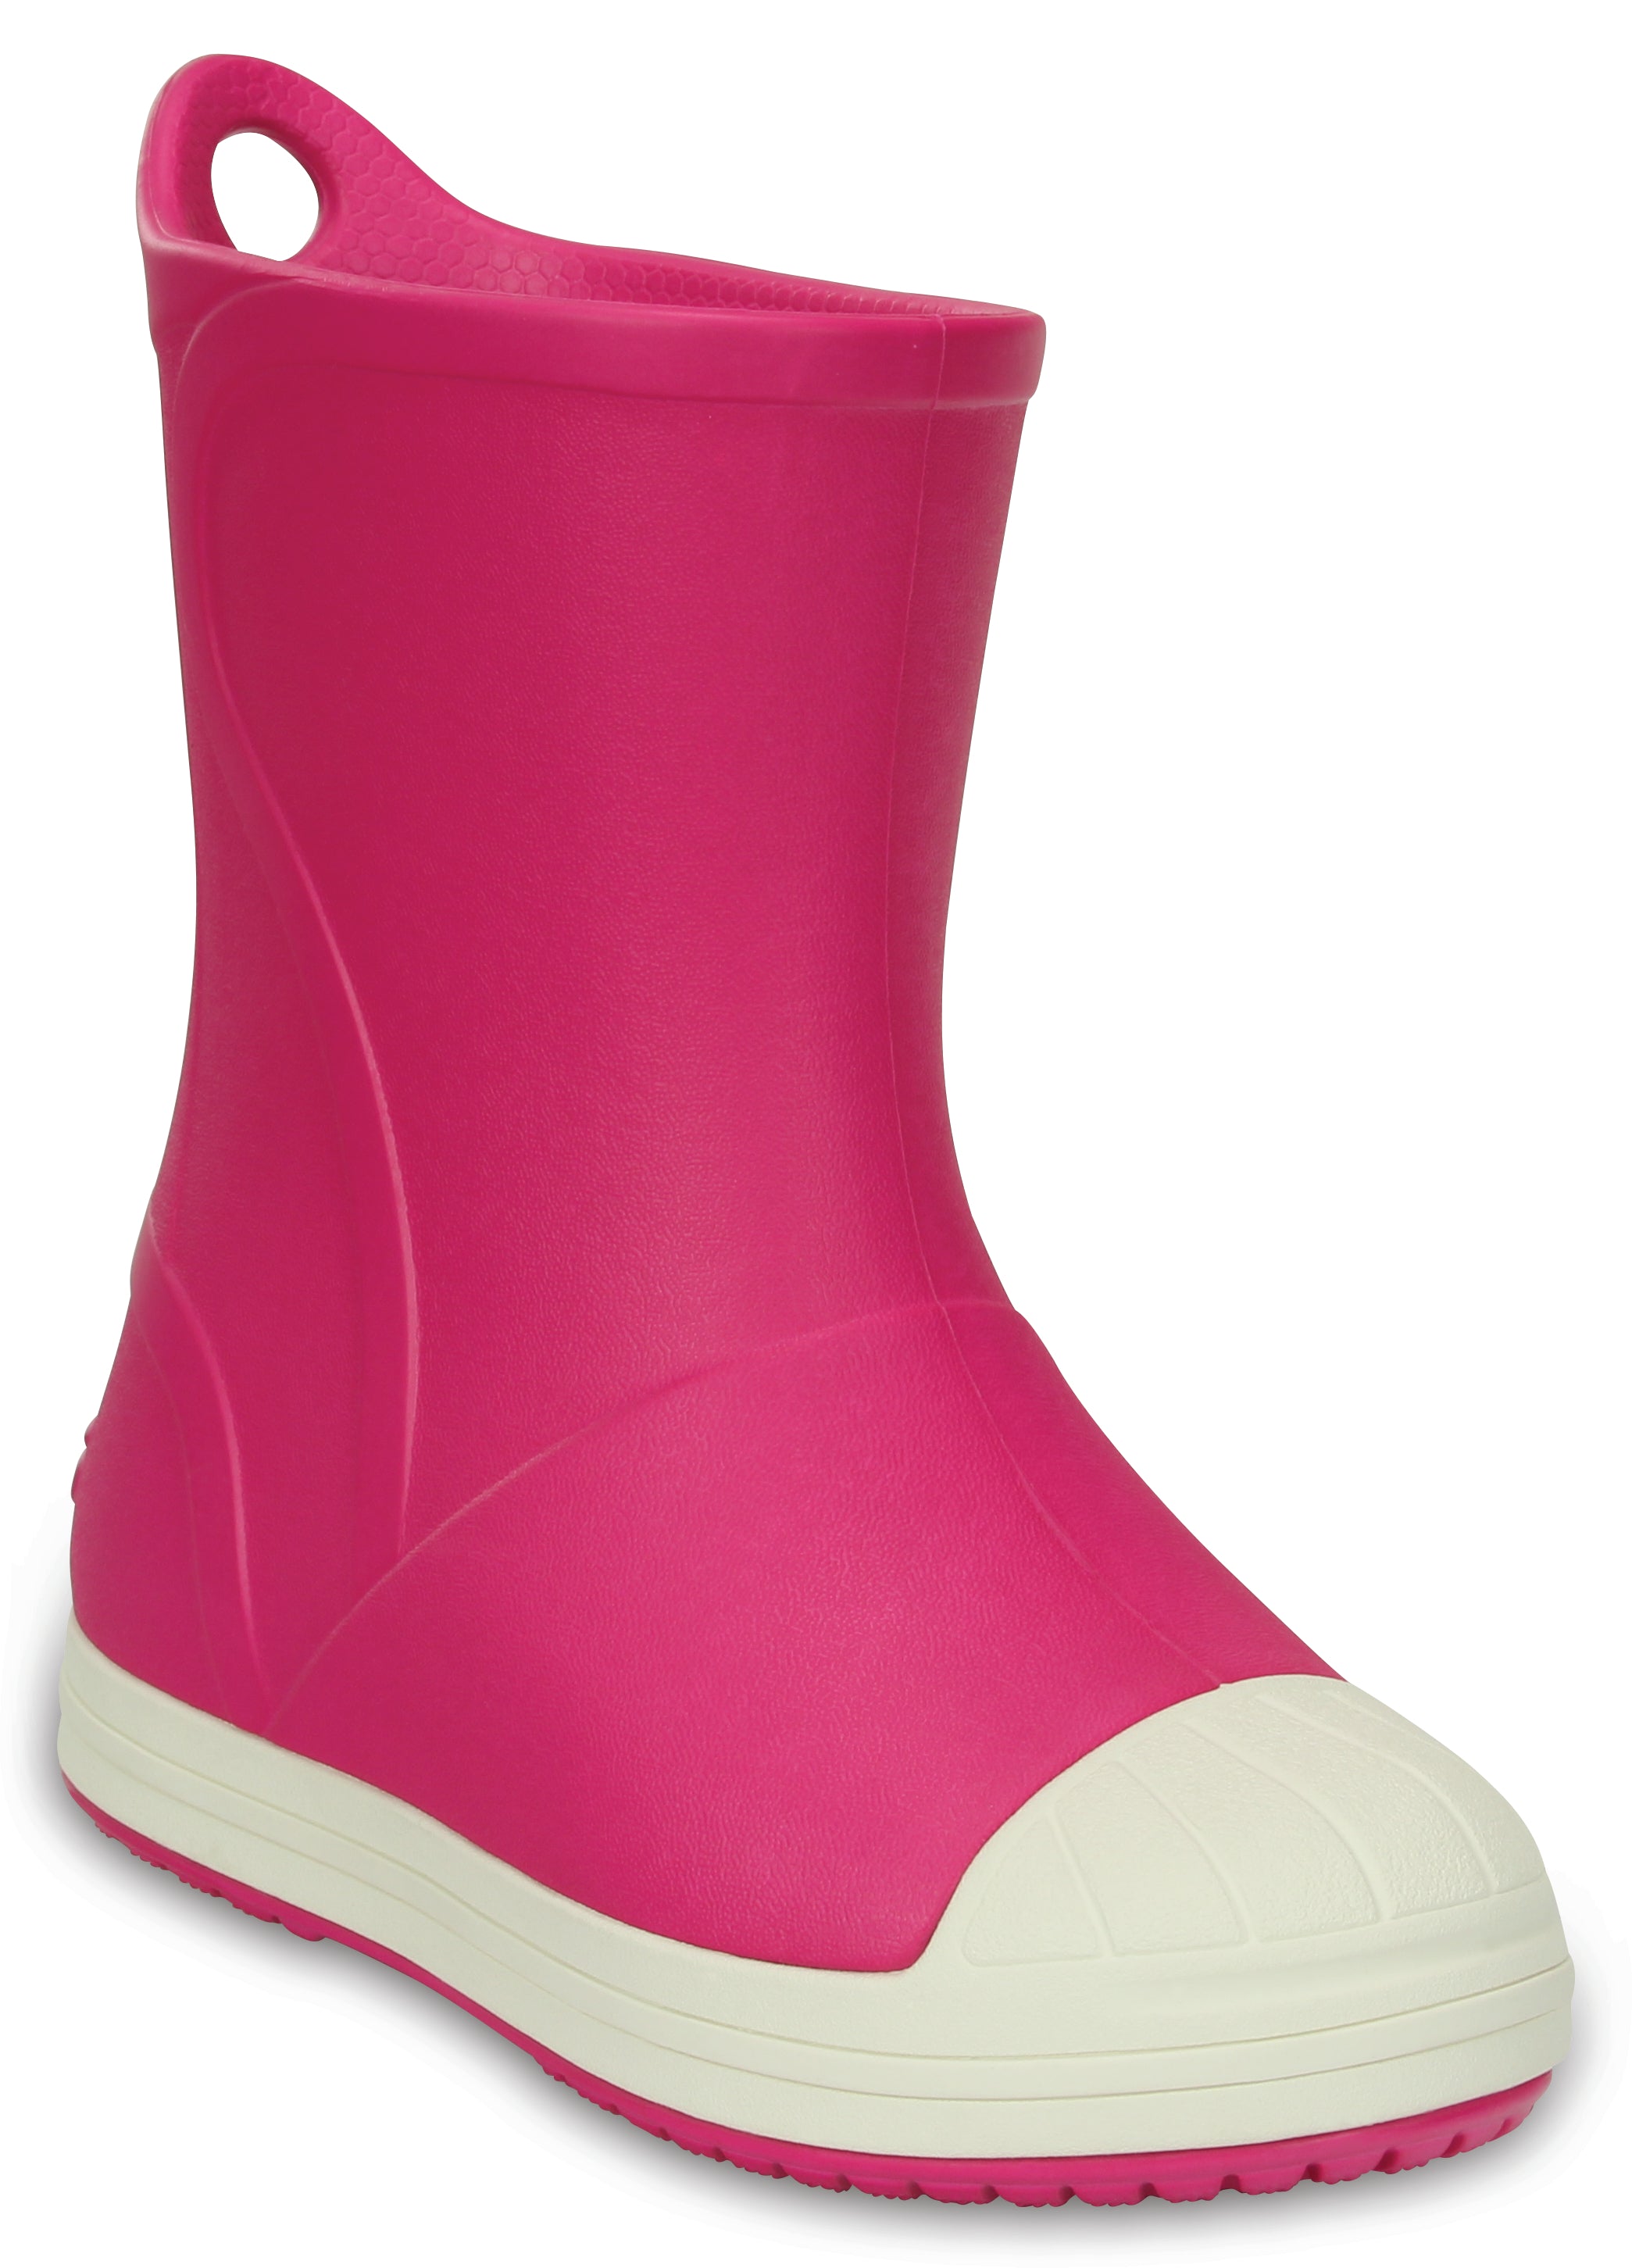 Crocs Bump It Boot Candy Pink/Oyster